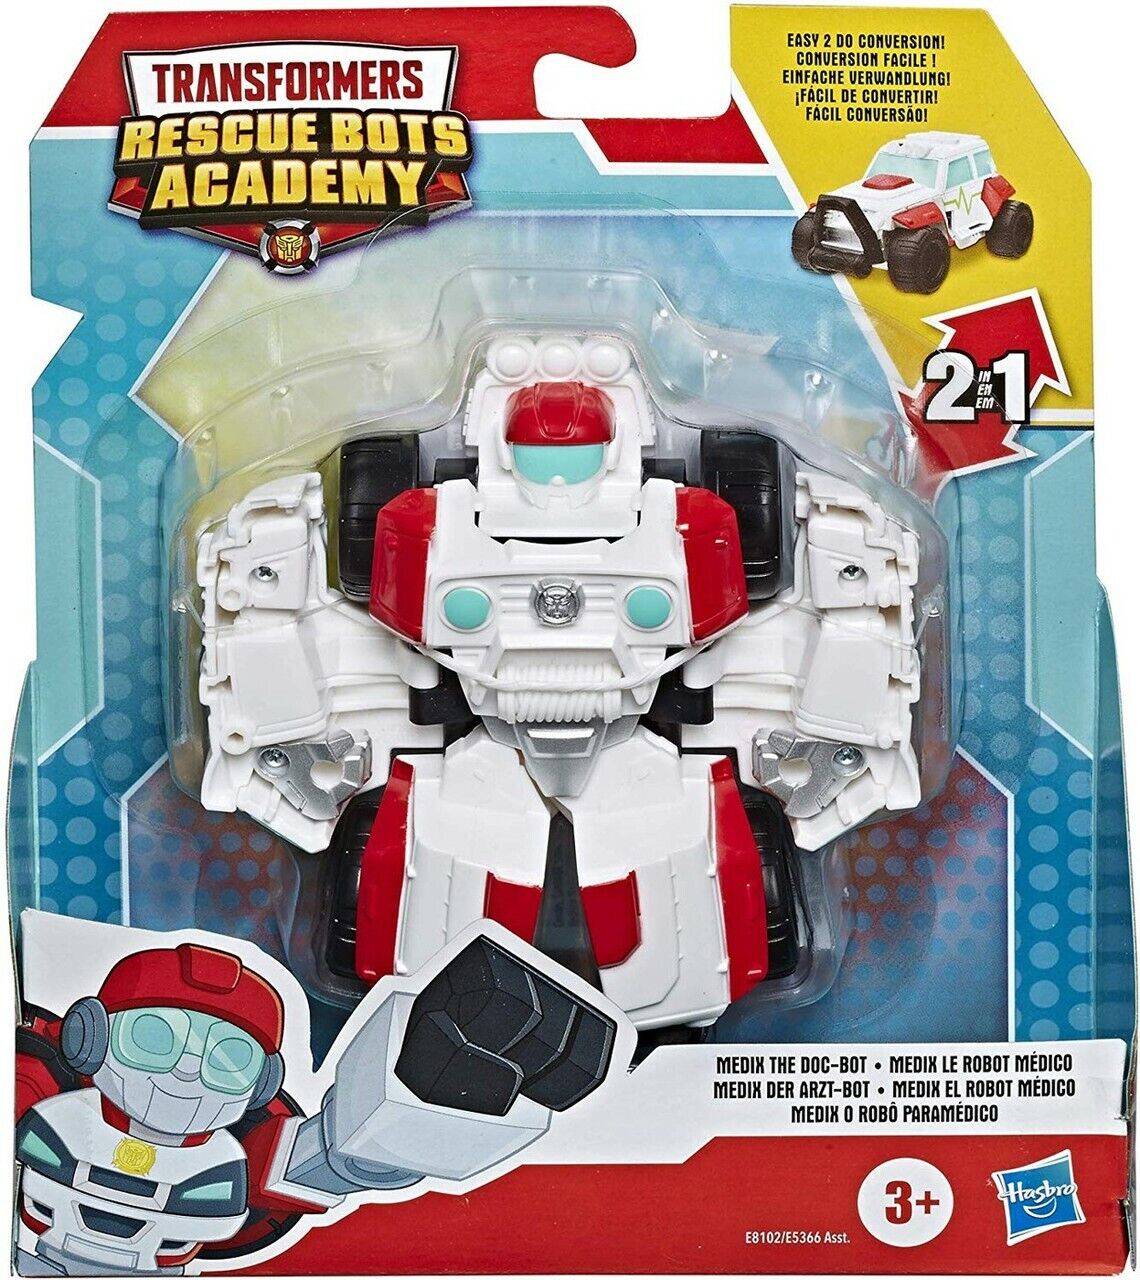 New Transformers Rescue Bots Academy Medix The Doc-Bot E8102 - Fast Shipping!